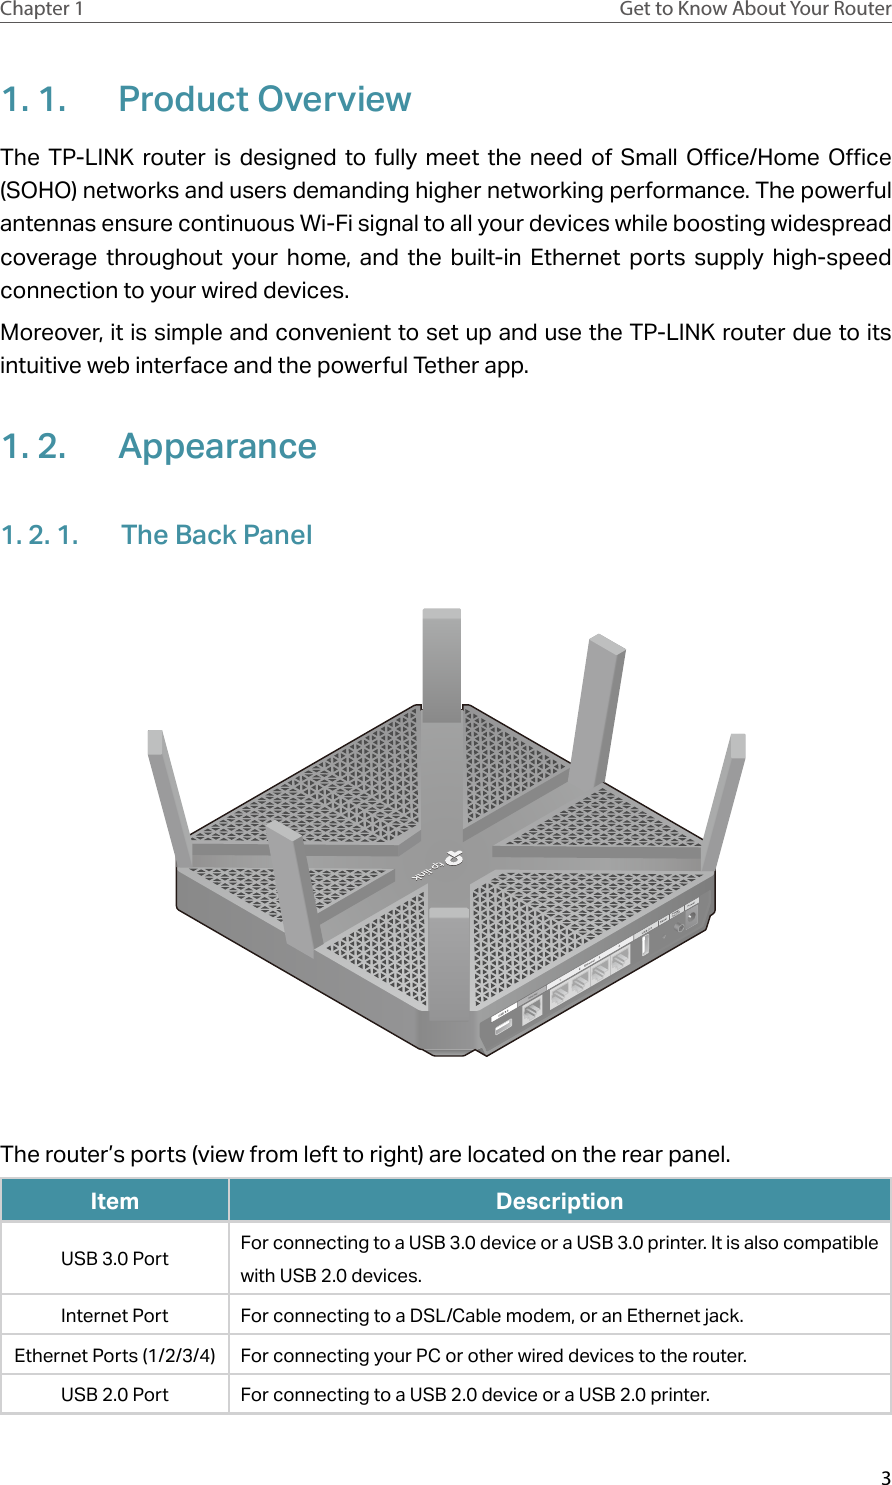 3Chapter 1 Get to Know About Your Router1. 1.  Product OverviewThe TP-LINK router is designed to fully meet the need of Small Office/Home Office (SOHO) networks and users demanding higher networking performance. The powerful antennas ensure continuous Wi-Fi signal to all your devices while boosting widespread coverage throughout your home, and the built-in Ethernet ports supply high-speed connection to your wired devices.Moreover, it is simple and convenient to set up and use the TP-LINK router due to its intuitive web interface and the powerful Tether app.  1. 2.  Appearance1. 2. 1.  The Back PanelThe router’s ports (view from left to right) are located on the rear panel.Item DescriptionUSB 3.0 Port For connecting to a USB 3.0 device or a USB 3.0 printer. It is also compatiblewith USB 2.0 devices.Internet Port For connecting to a DSL/Cable modem, or an Ethernet jack.Ethernet Ports (1/2/3/4) For connecting your PC or other wired devices to the router.USB 2.0 Port For connecting to a USB 2.0 device or a USB 2.0 printer.